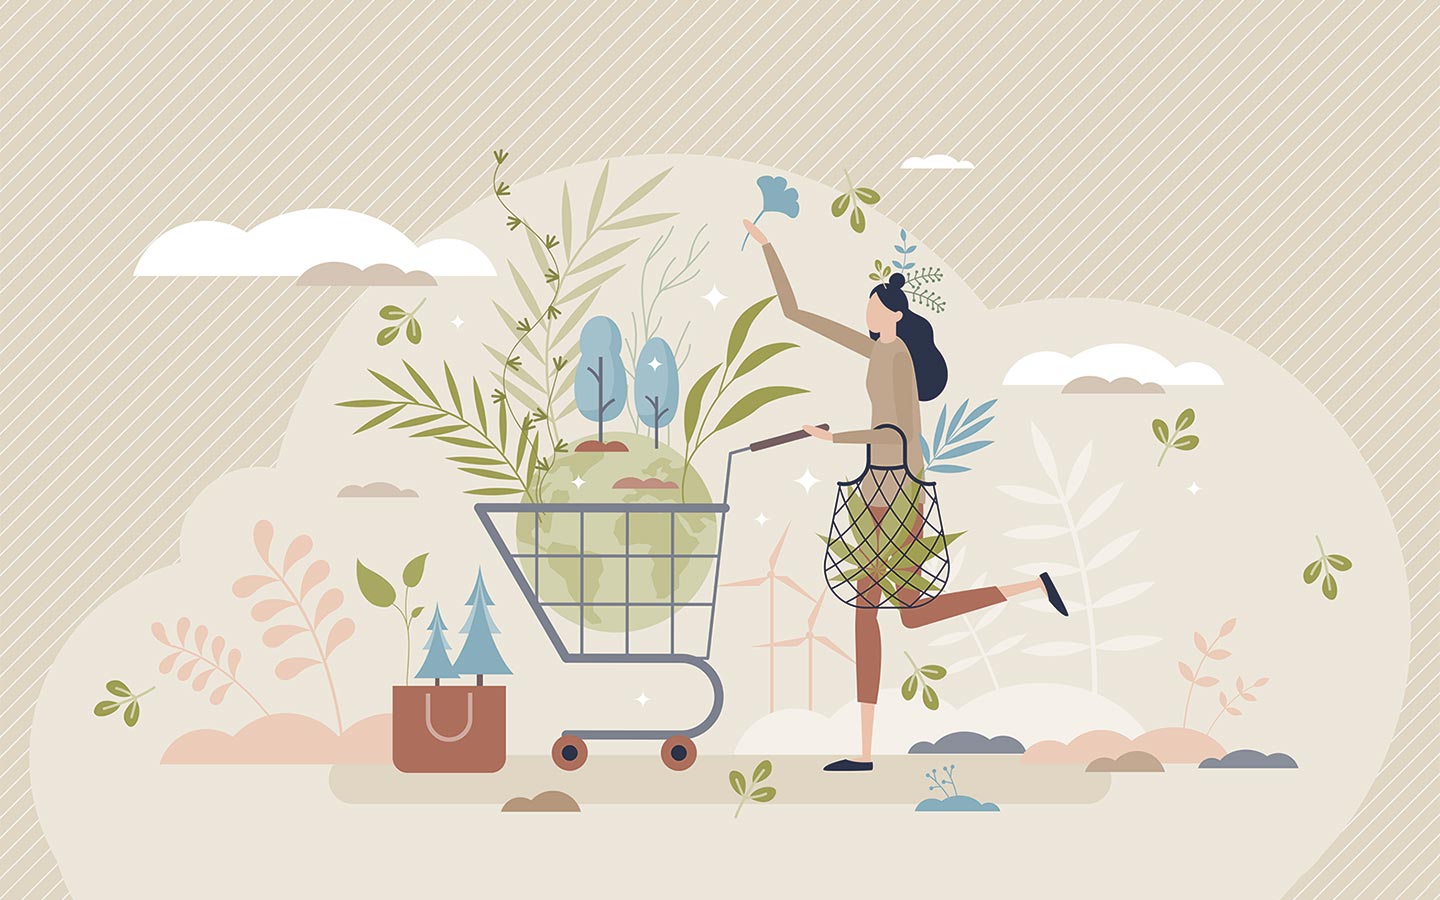 An illustration showing a consumer making environmentally conscious choices during shopping activities